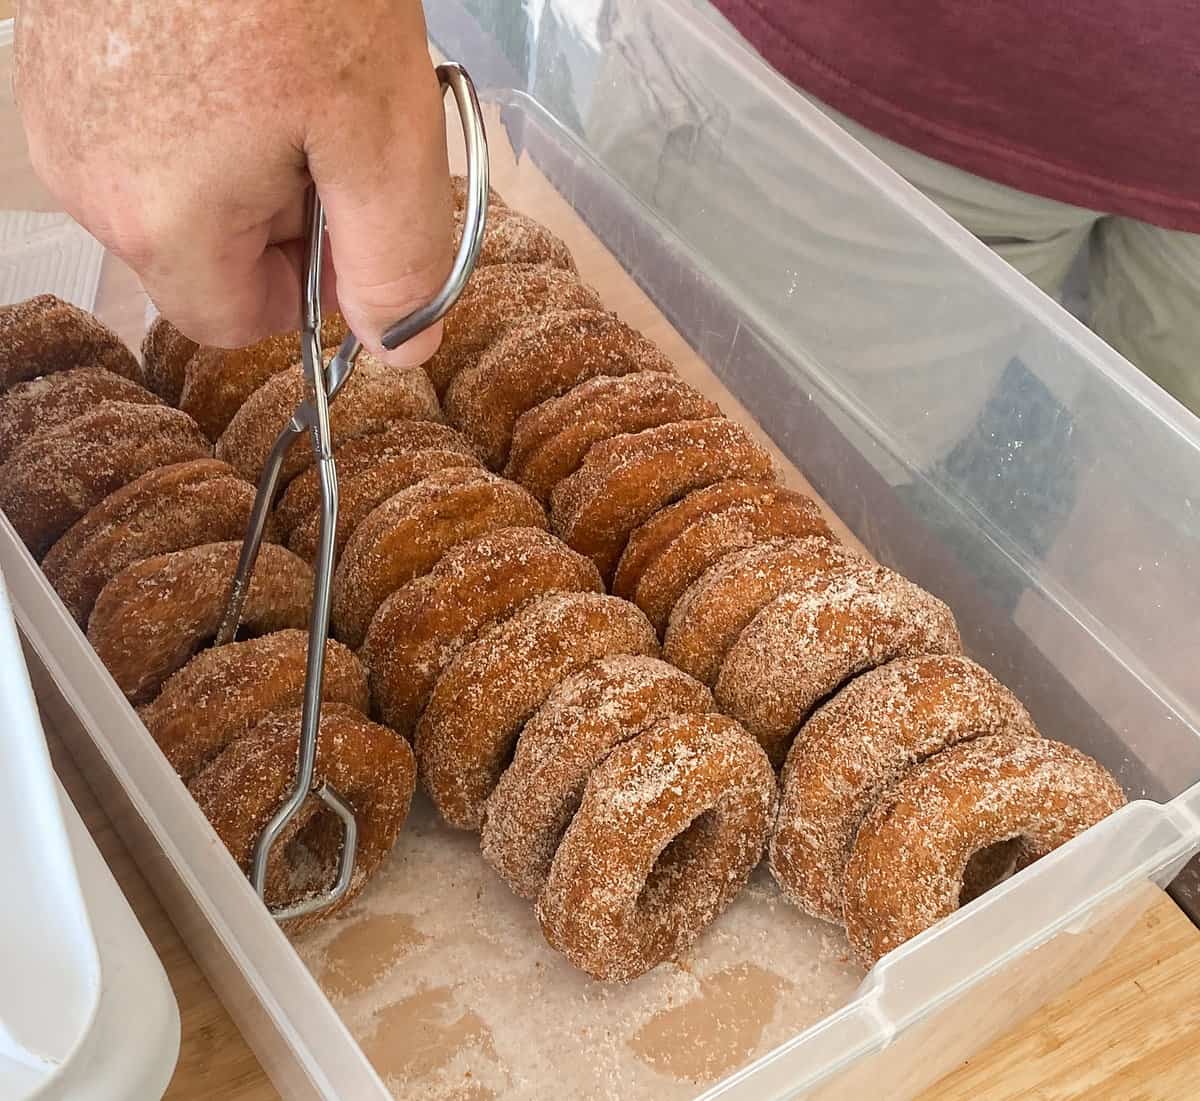 Rows if sugar-coated donuts in a box.